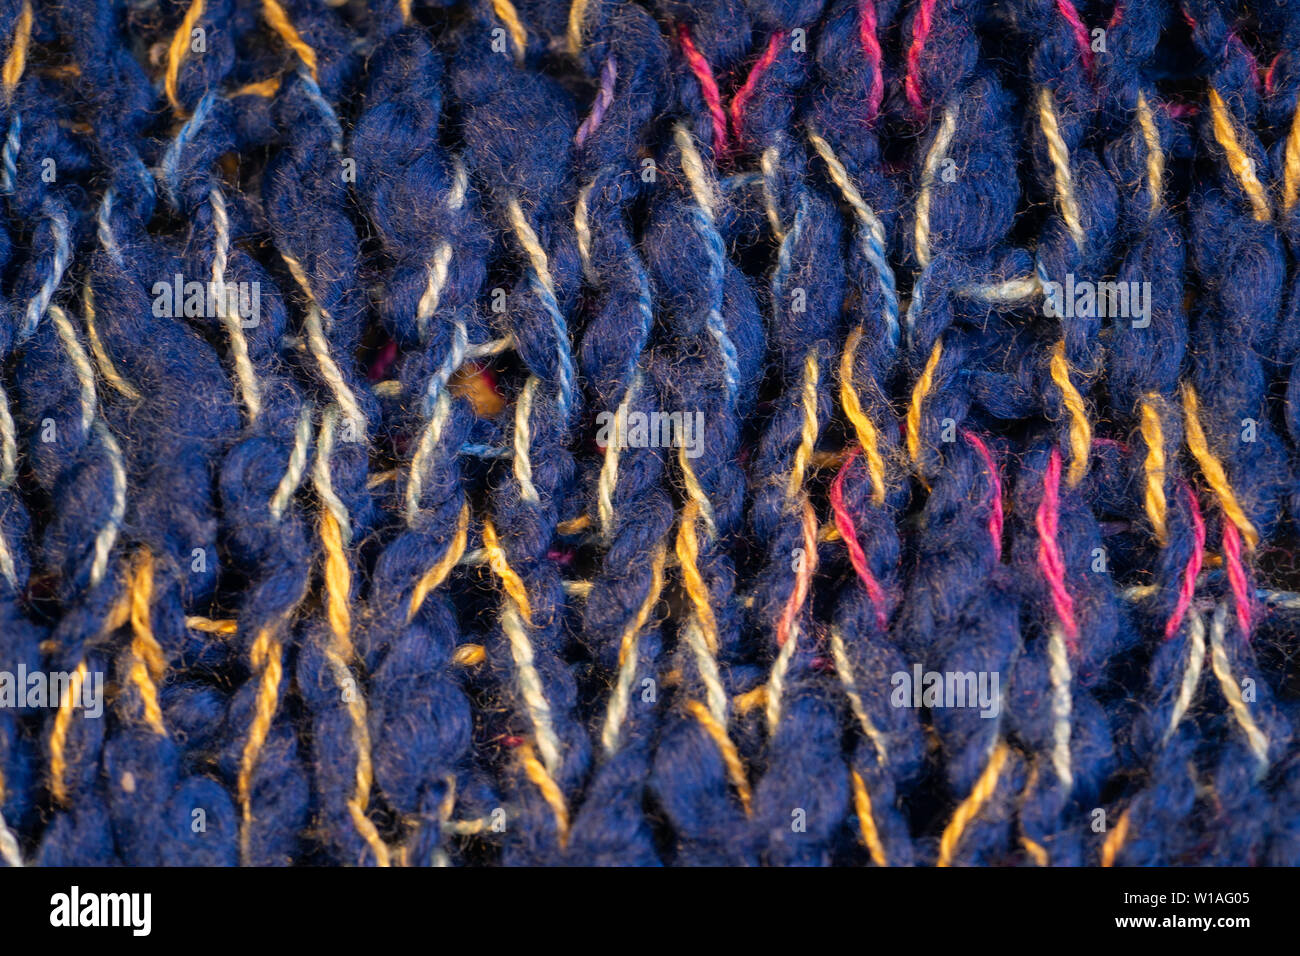 Texture knitted fabric. Warm sweater made of different color yarn. Creative vintage background Stock Photo